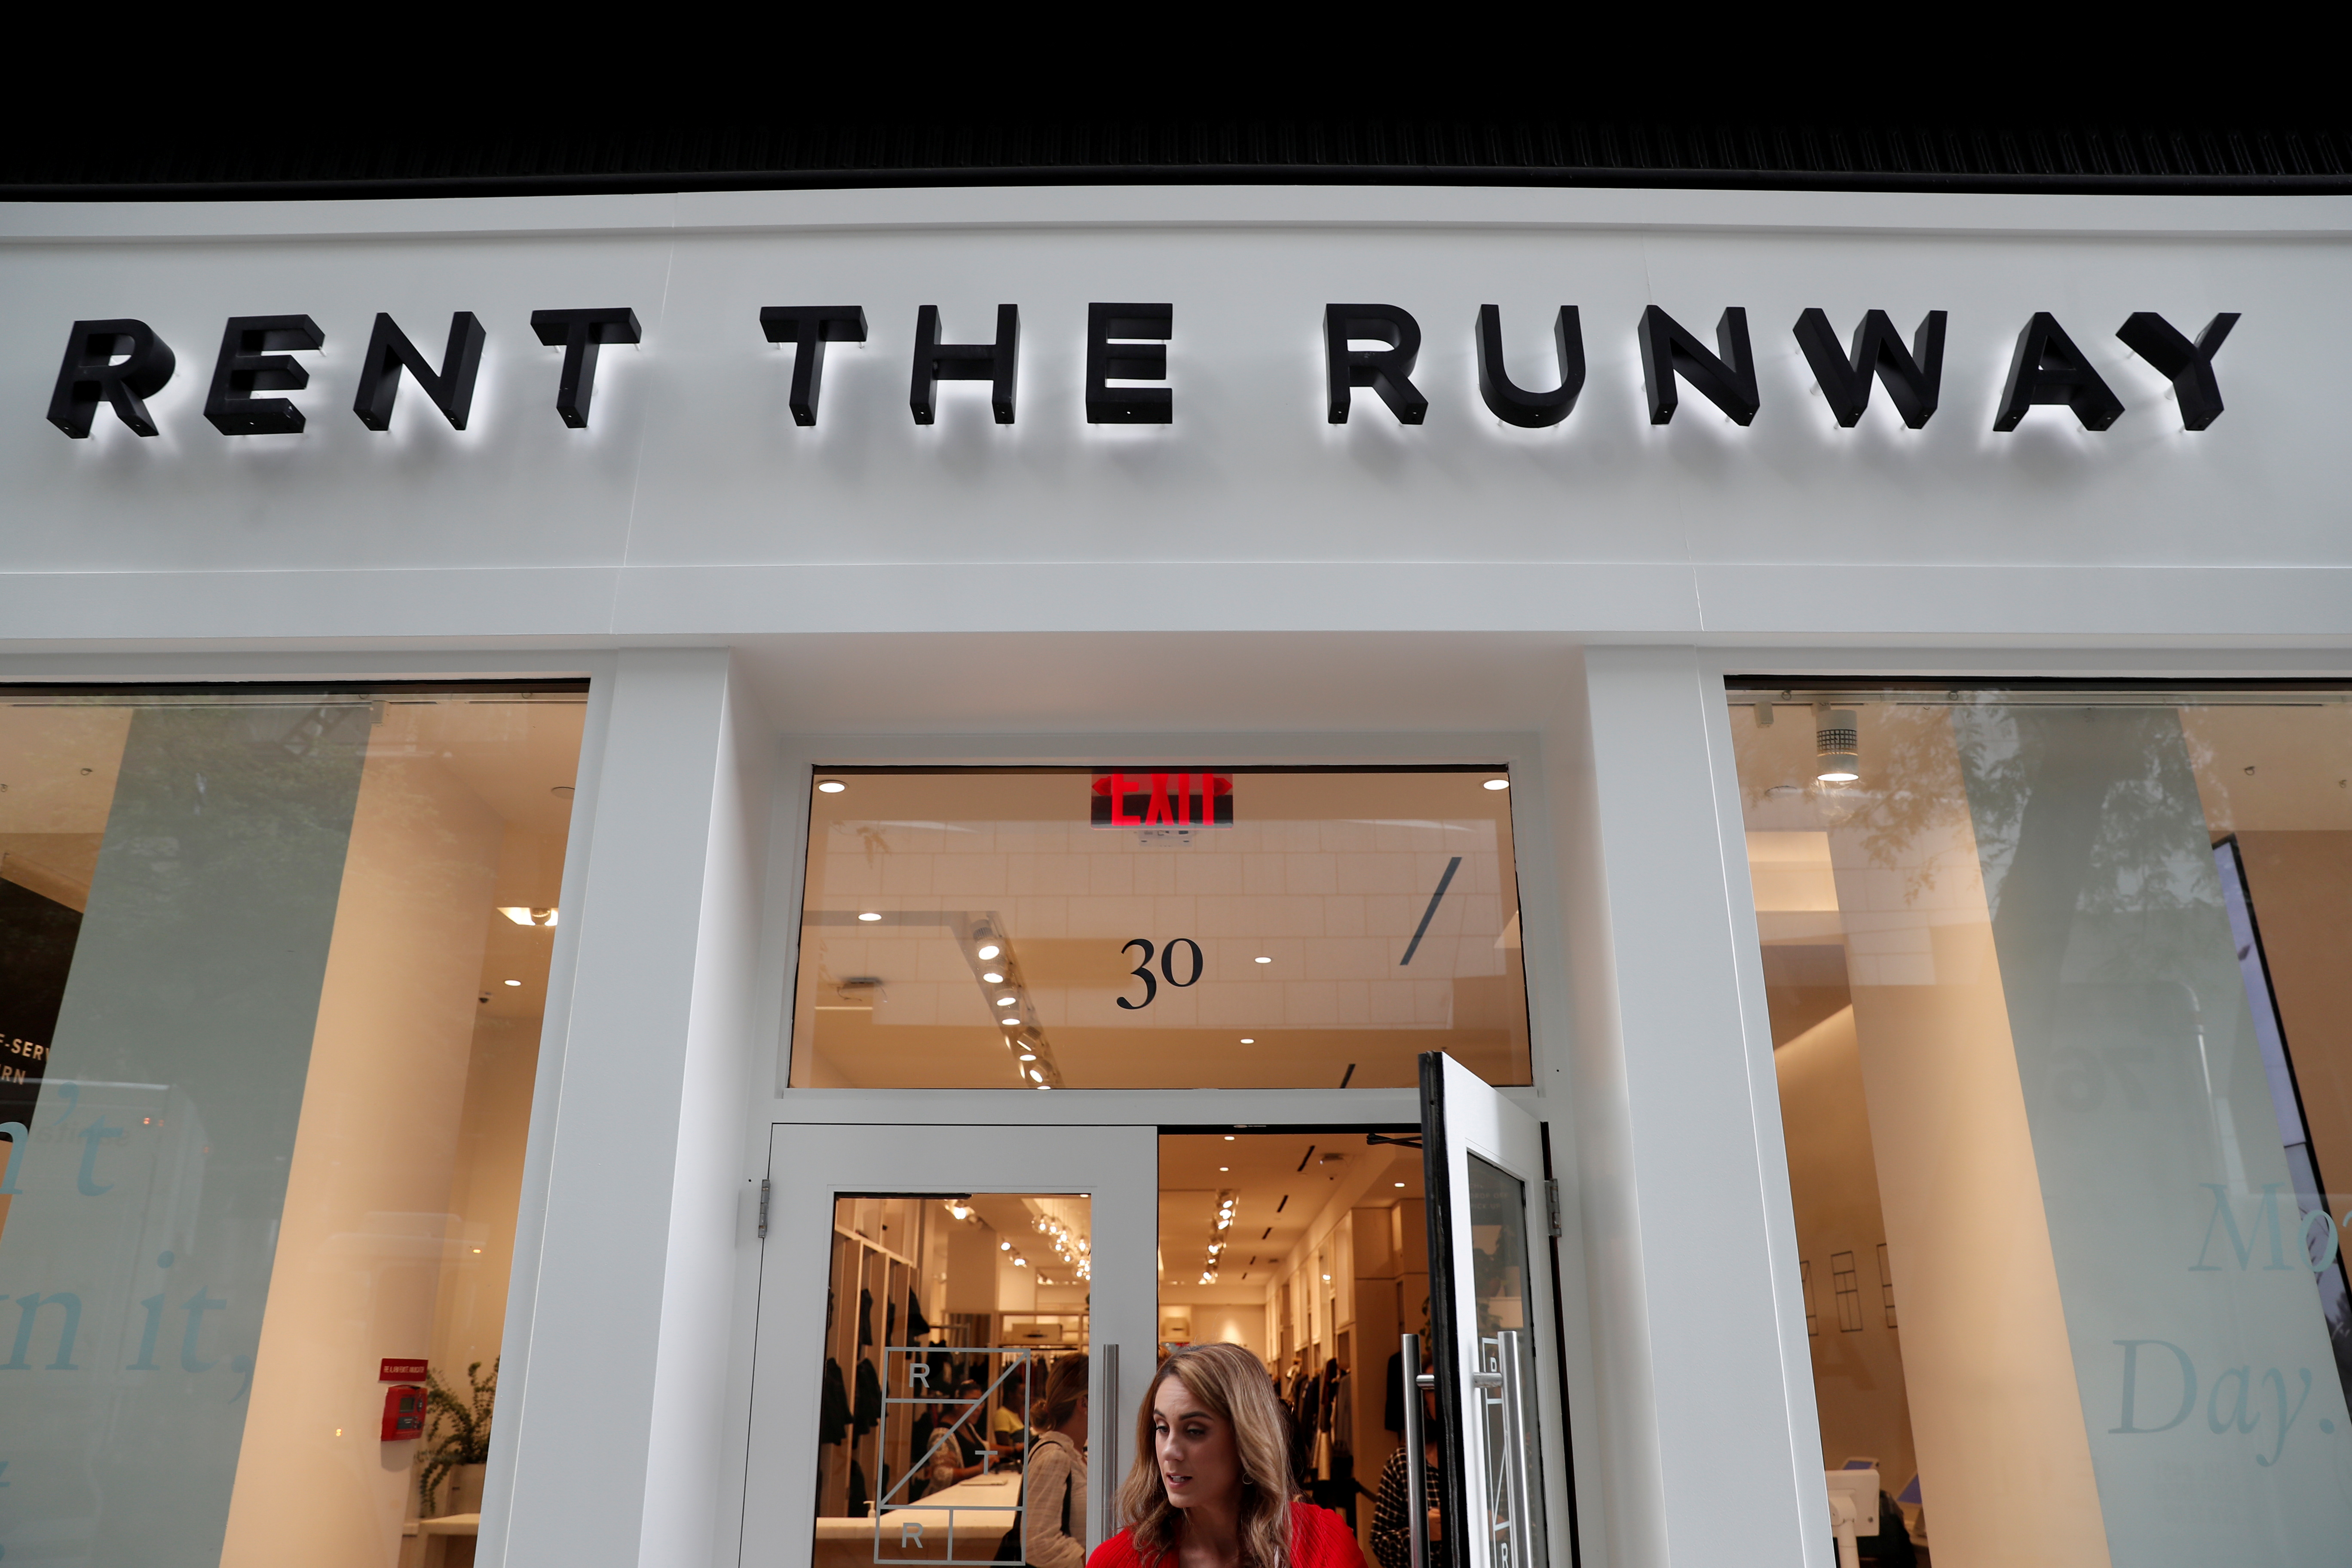 The Rent The Runway store, an online subscription service for women to rent designer dress and accessory items, is seen in New York City, New York, U.S., September 12, 2019. Picture taken September 12, 2019. REUTERS/Shannon Stapleton/File Photo